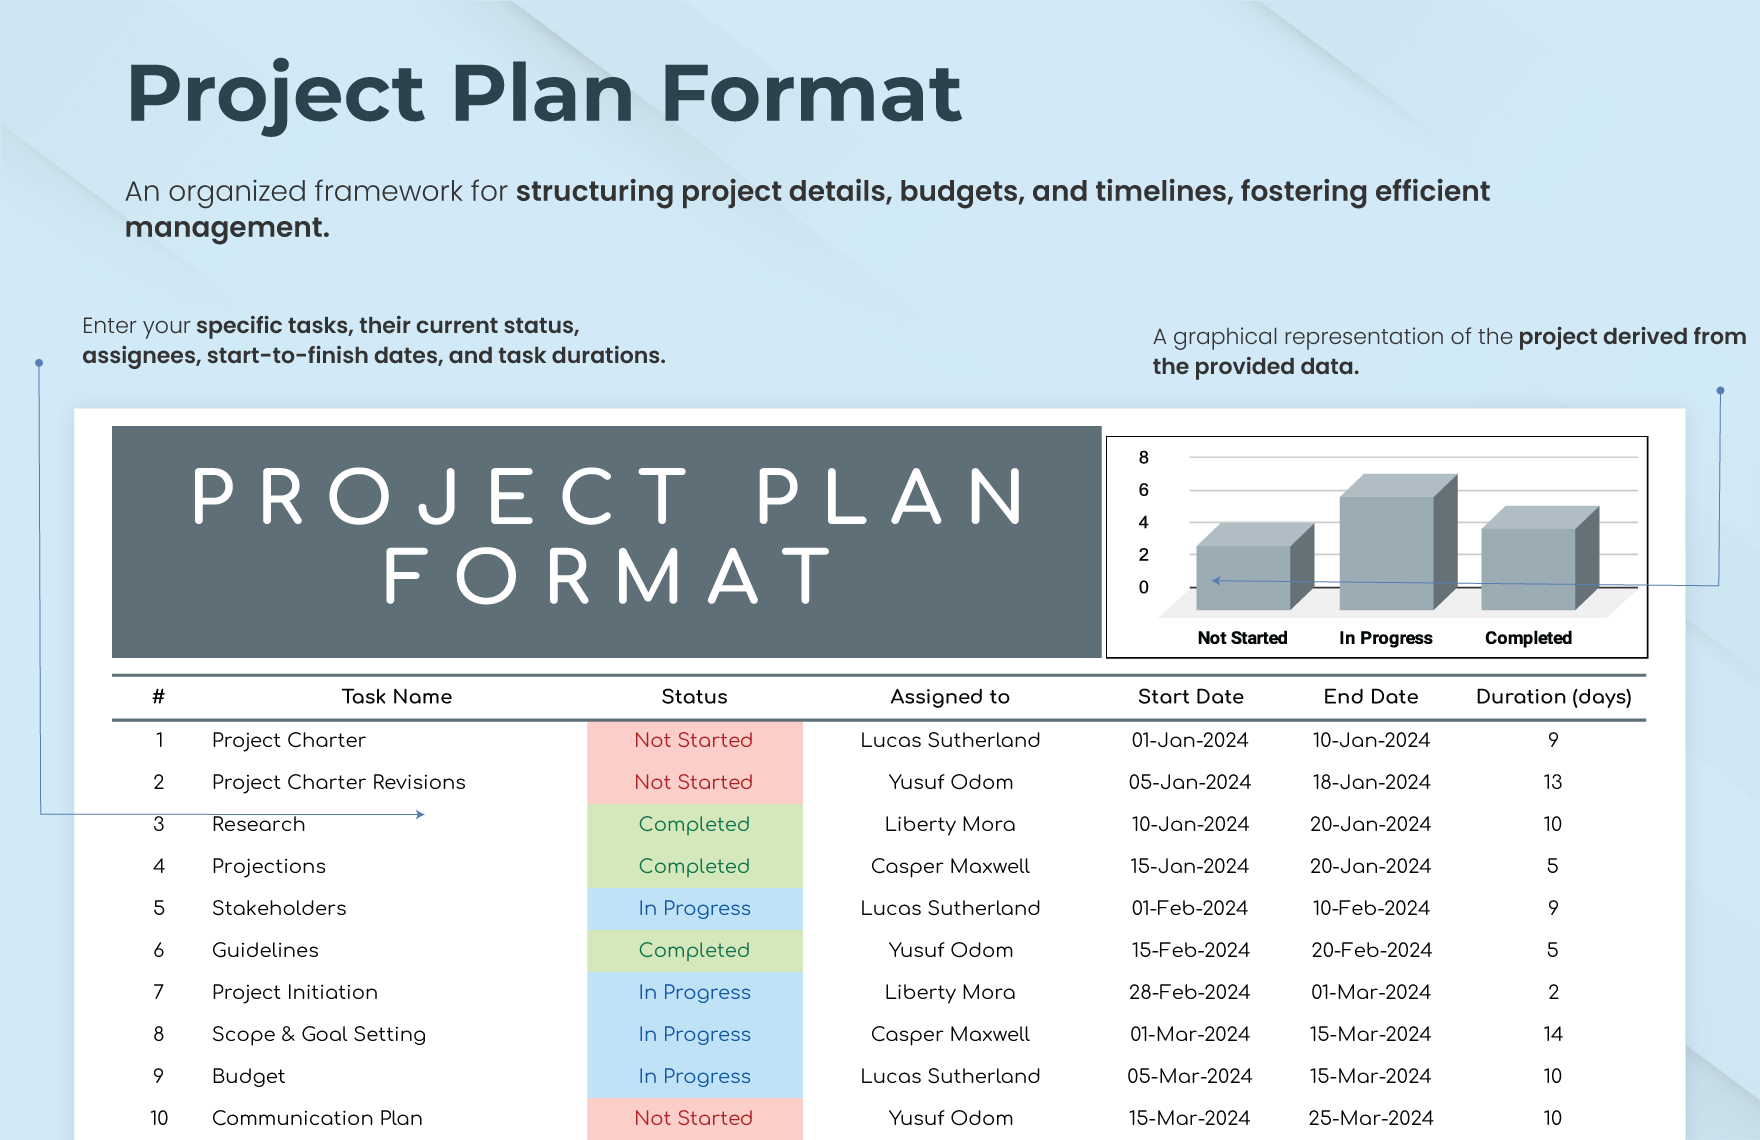 Project Plan Format Template